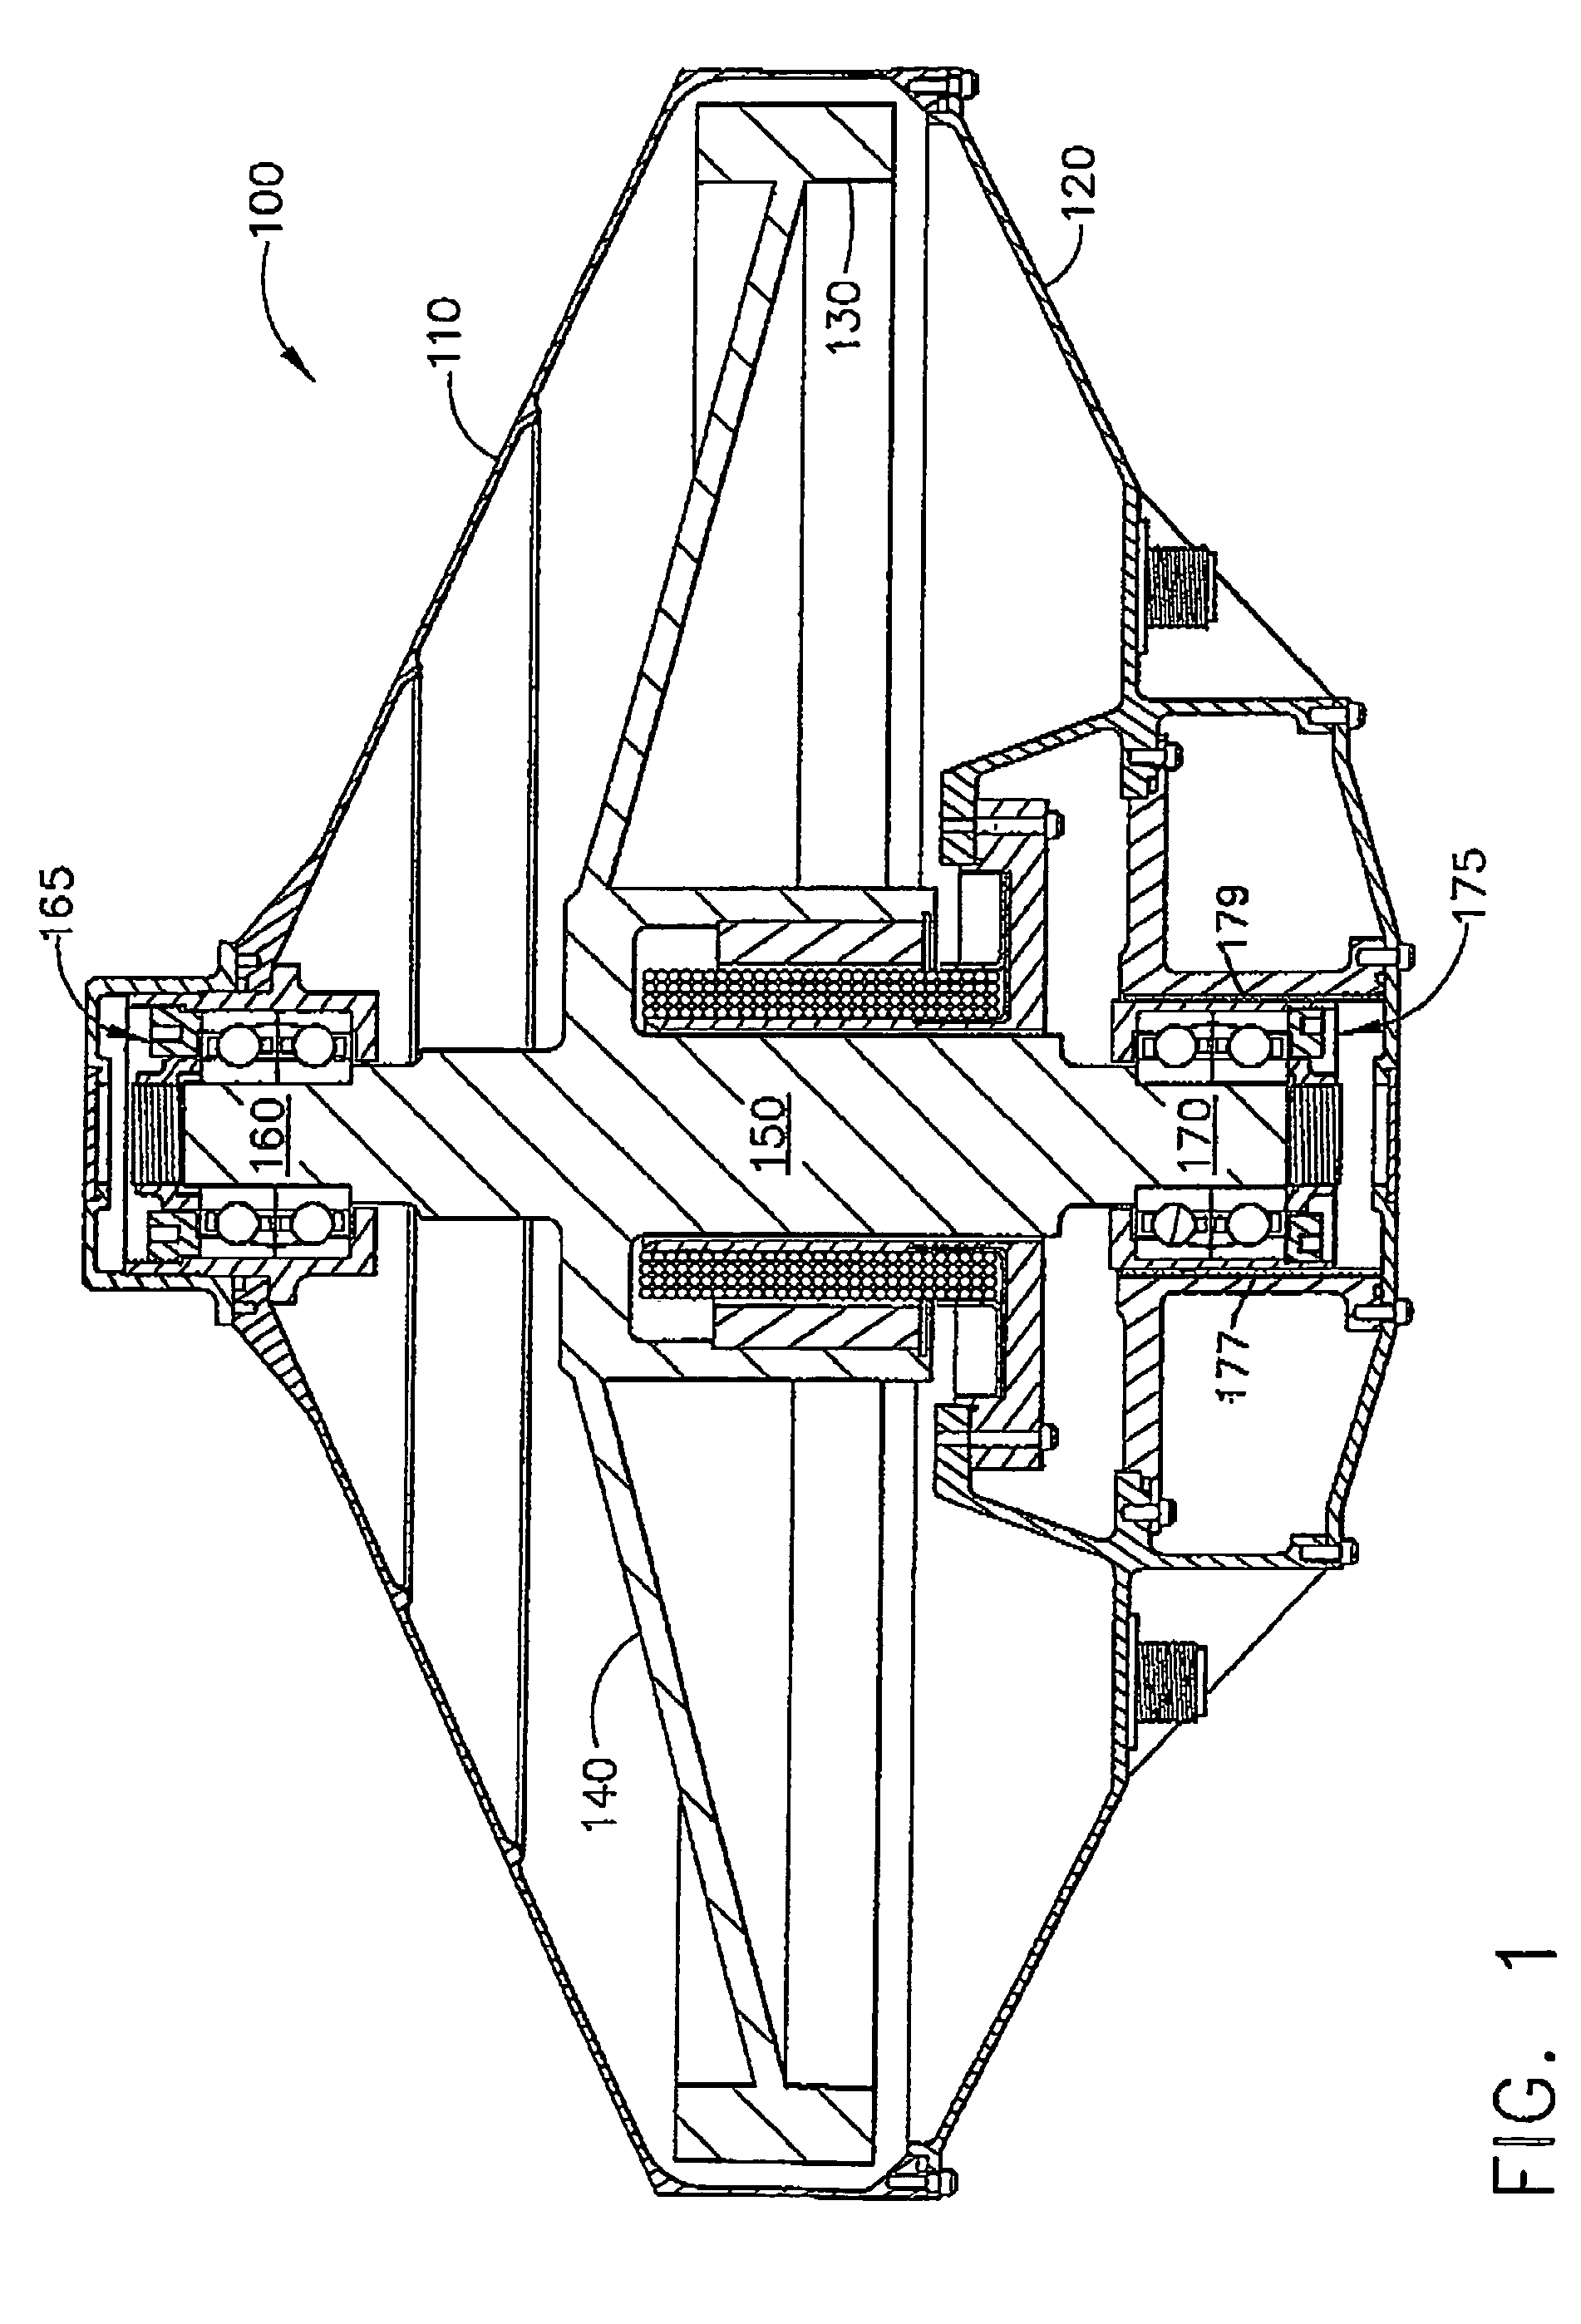 Methods and apparatus for tuned axial damping in rotating machinery with floating bearing cartridge